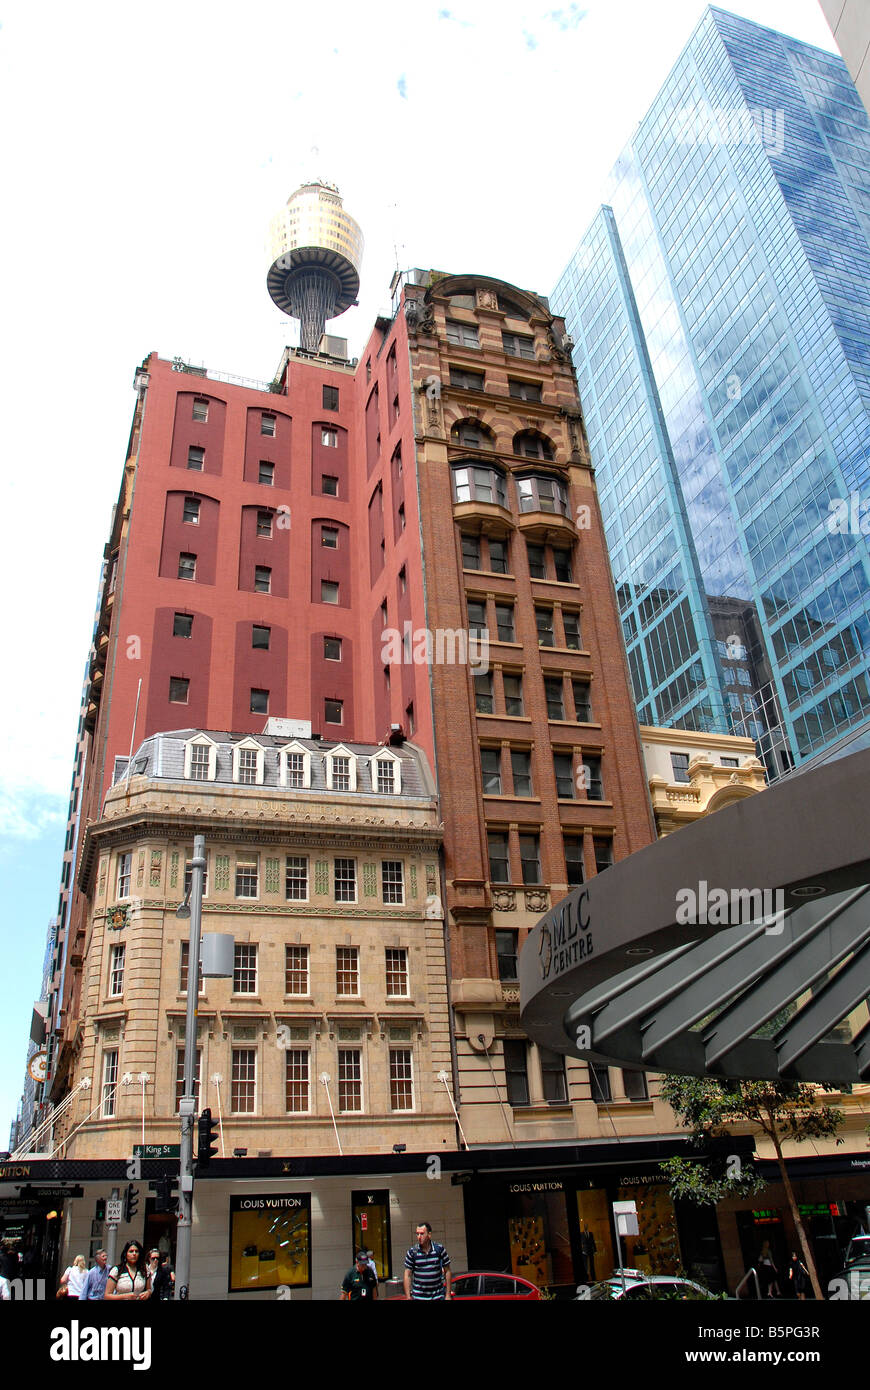 Modern and old buildings, Louis Vuitton house, Sydney, Australia Stock Photo